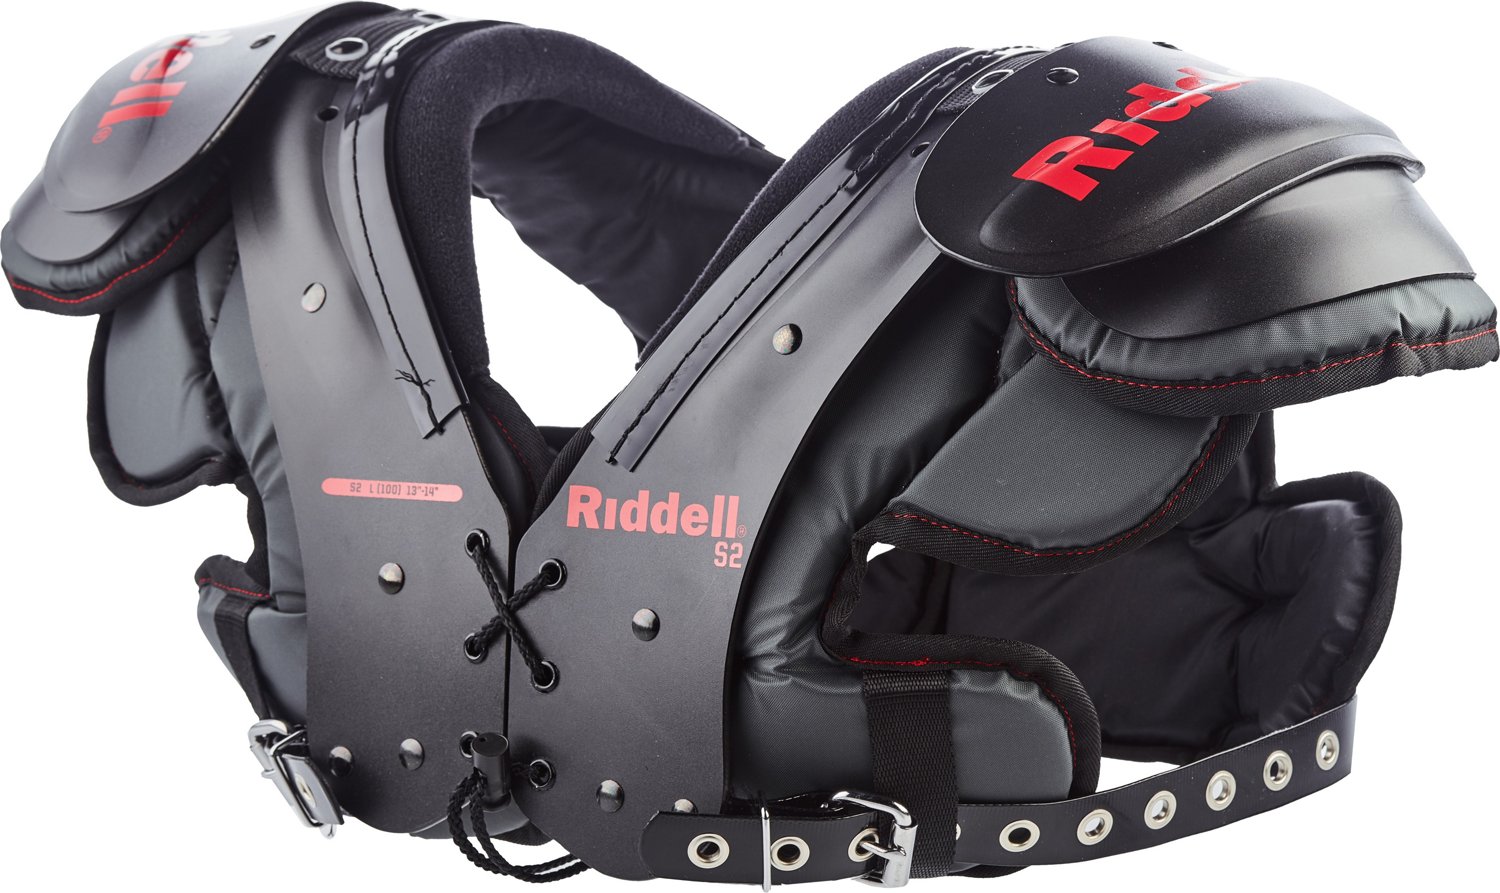 Riddell Boys' S2 Shoulder Pads | Free Shipping at Academy